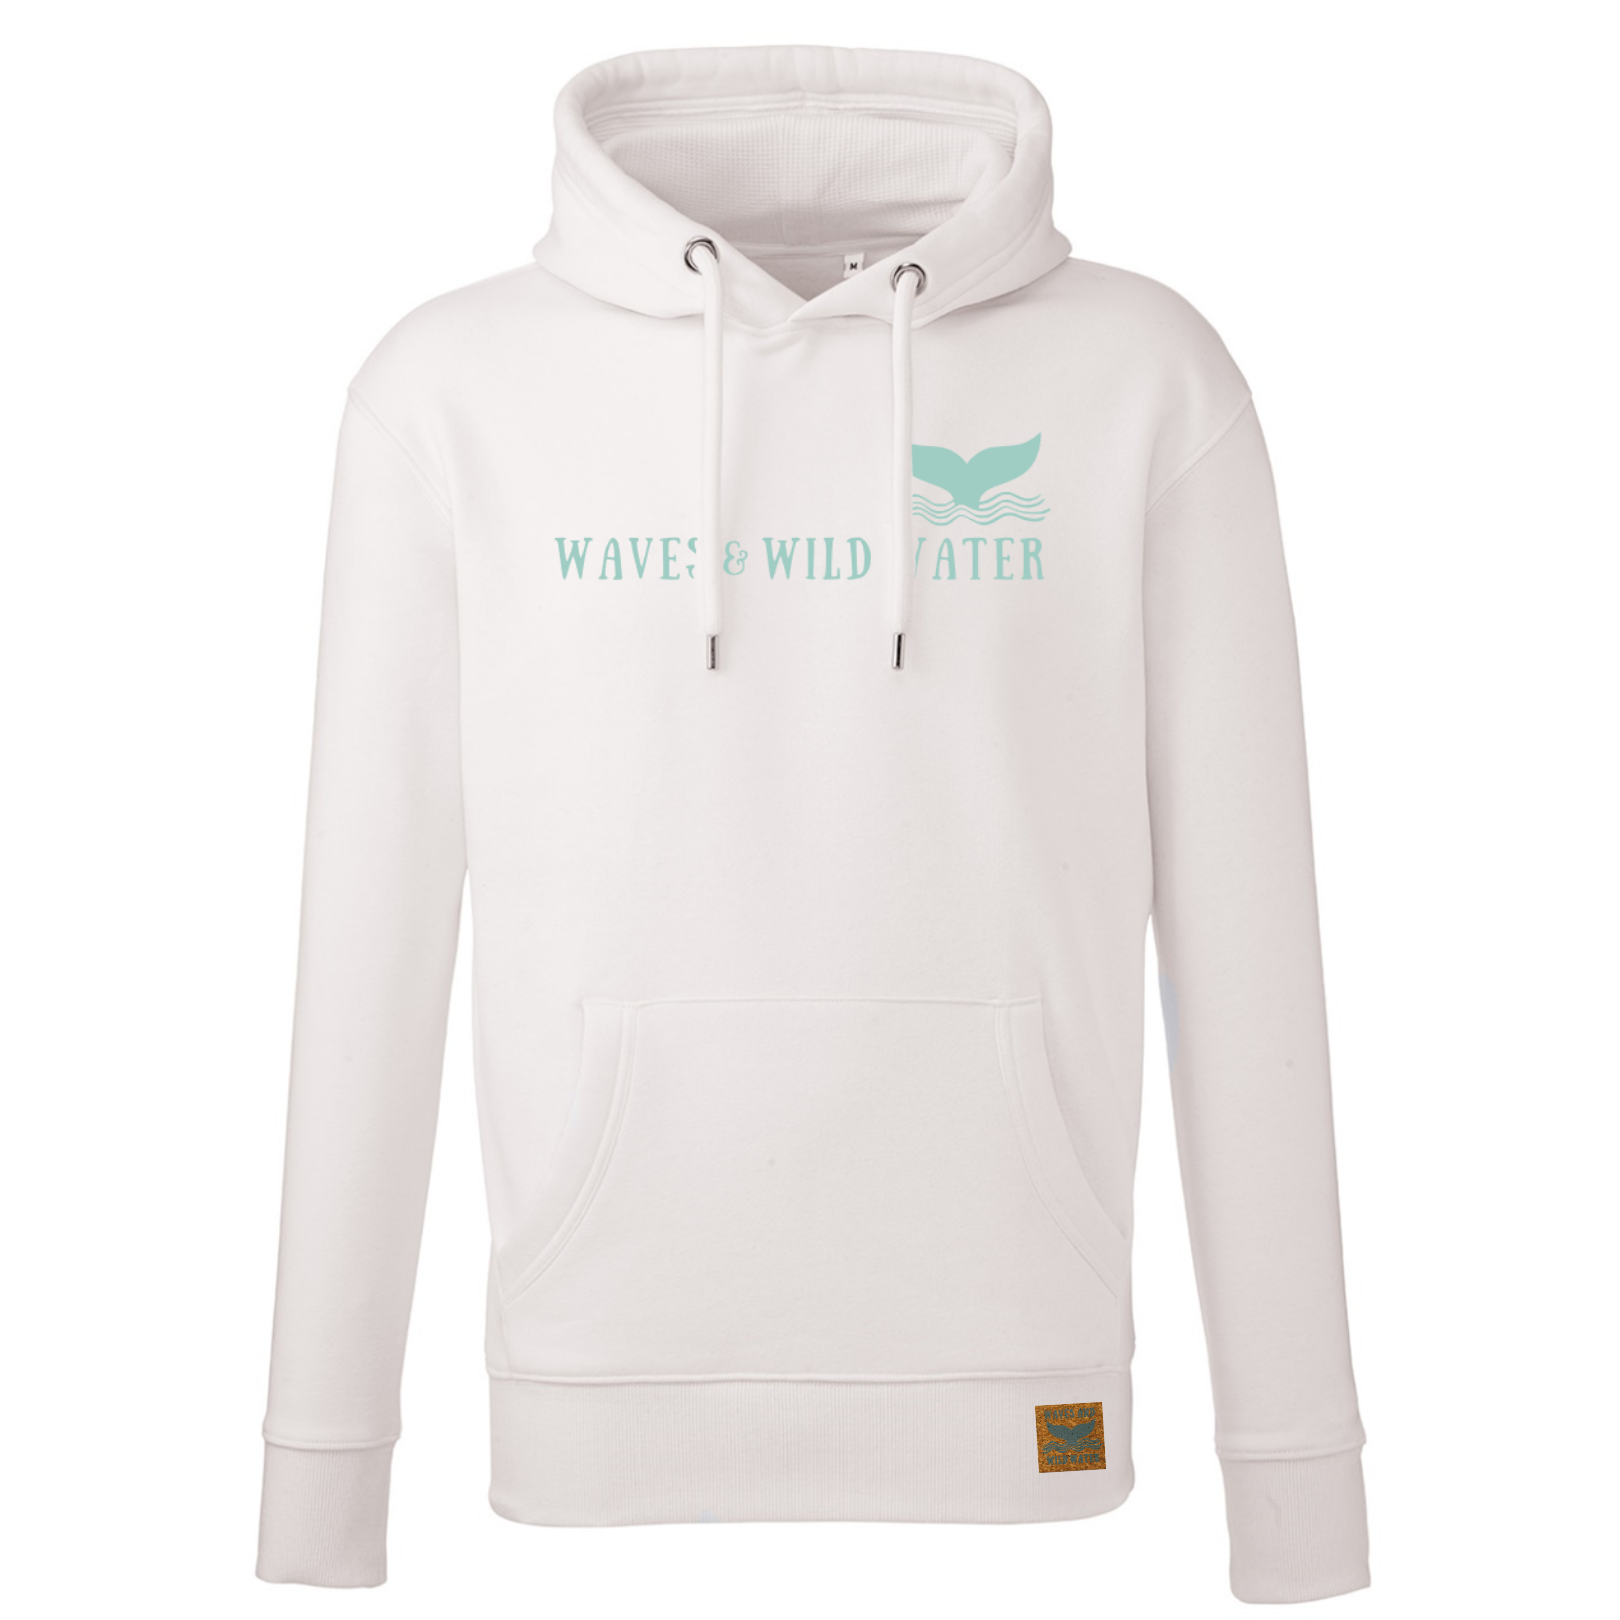 Loving this new hoodie from the Beach Hut Hoodies collection. Our Waves and Wild Water logo and text is printed across the front of the natural coloured hoodie in the brand colours of teal blue ink. This hoodie would be a great gift for any wild swimmer or sea dipper.